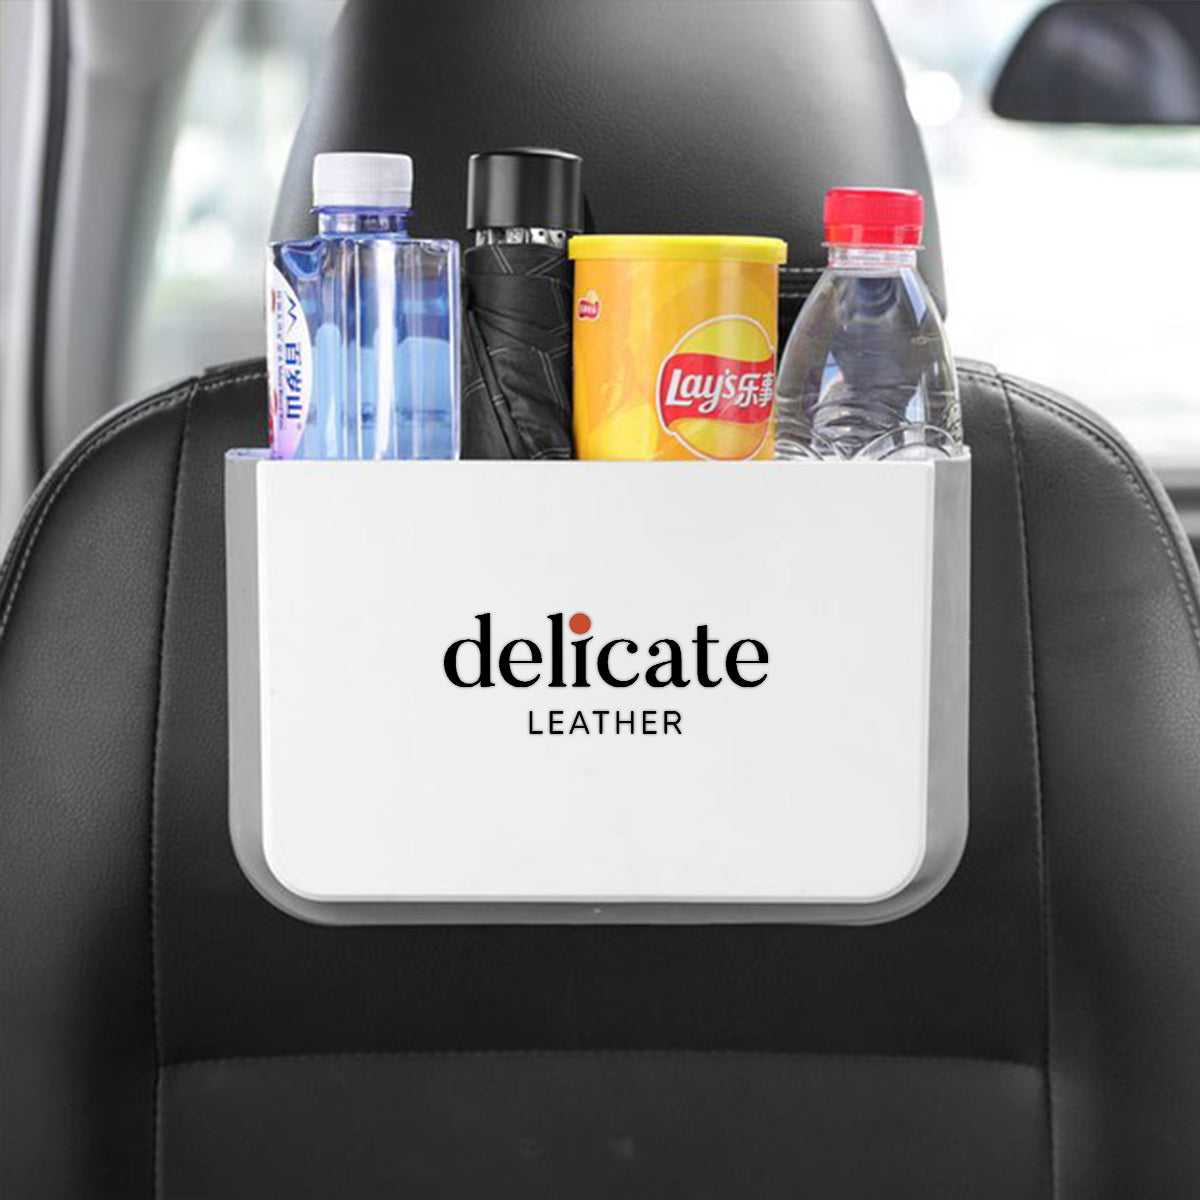 Hanging Waterproof Car Trash can-Foldable, Custom For Your Cars, Waterproof, and Equipped with Cup Holders and Trays. Multi-Purpose, Car Accessories IN11992 - Delicate Leather